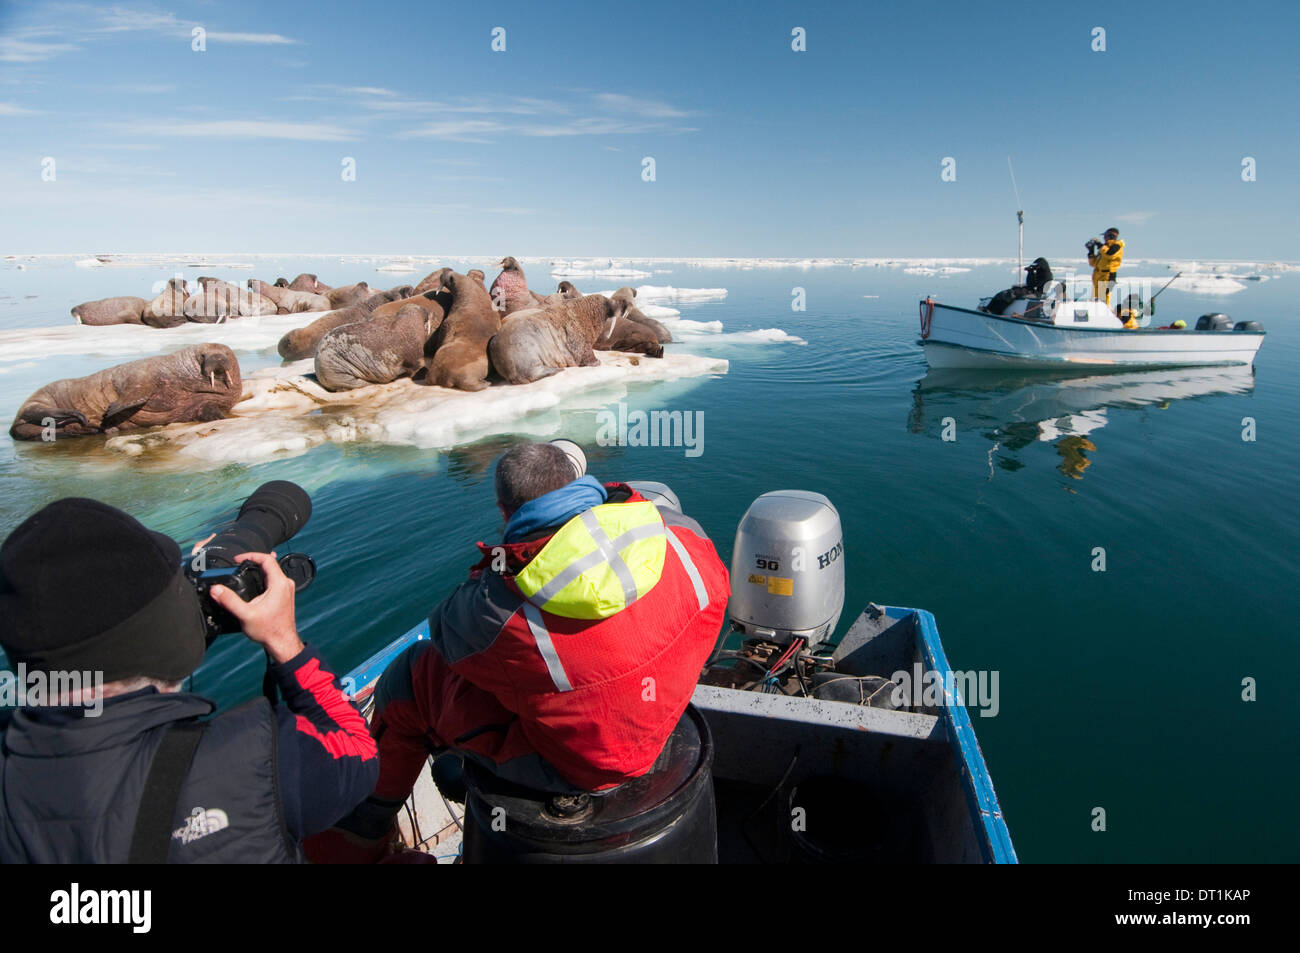 Tourists photographing a group of walrus (Odobenus rosmarus) resting, Arctic Kingdom expedition, Foxe Basin, Nunavut, Canada Stock Photo